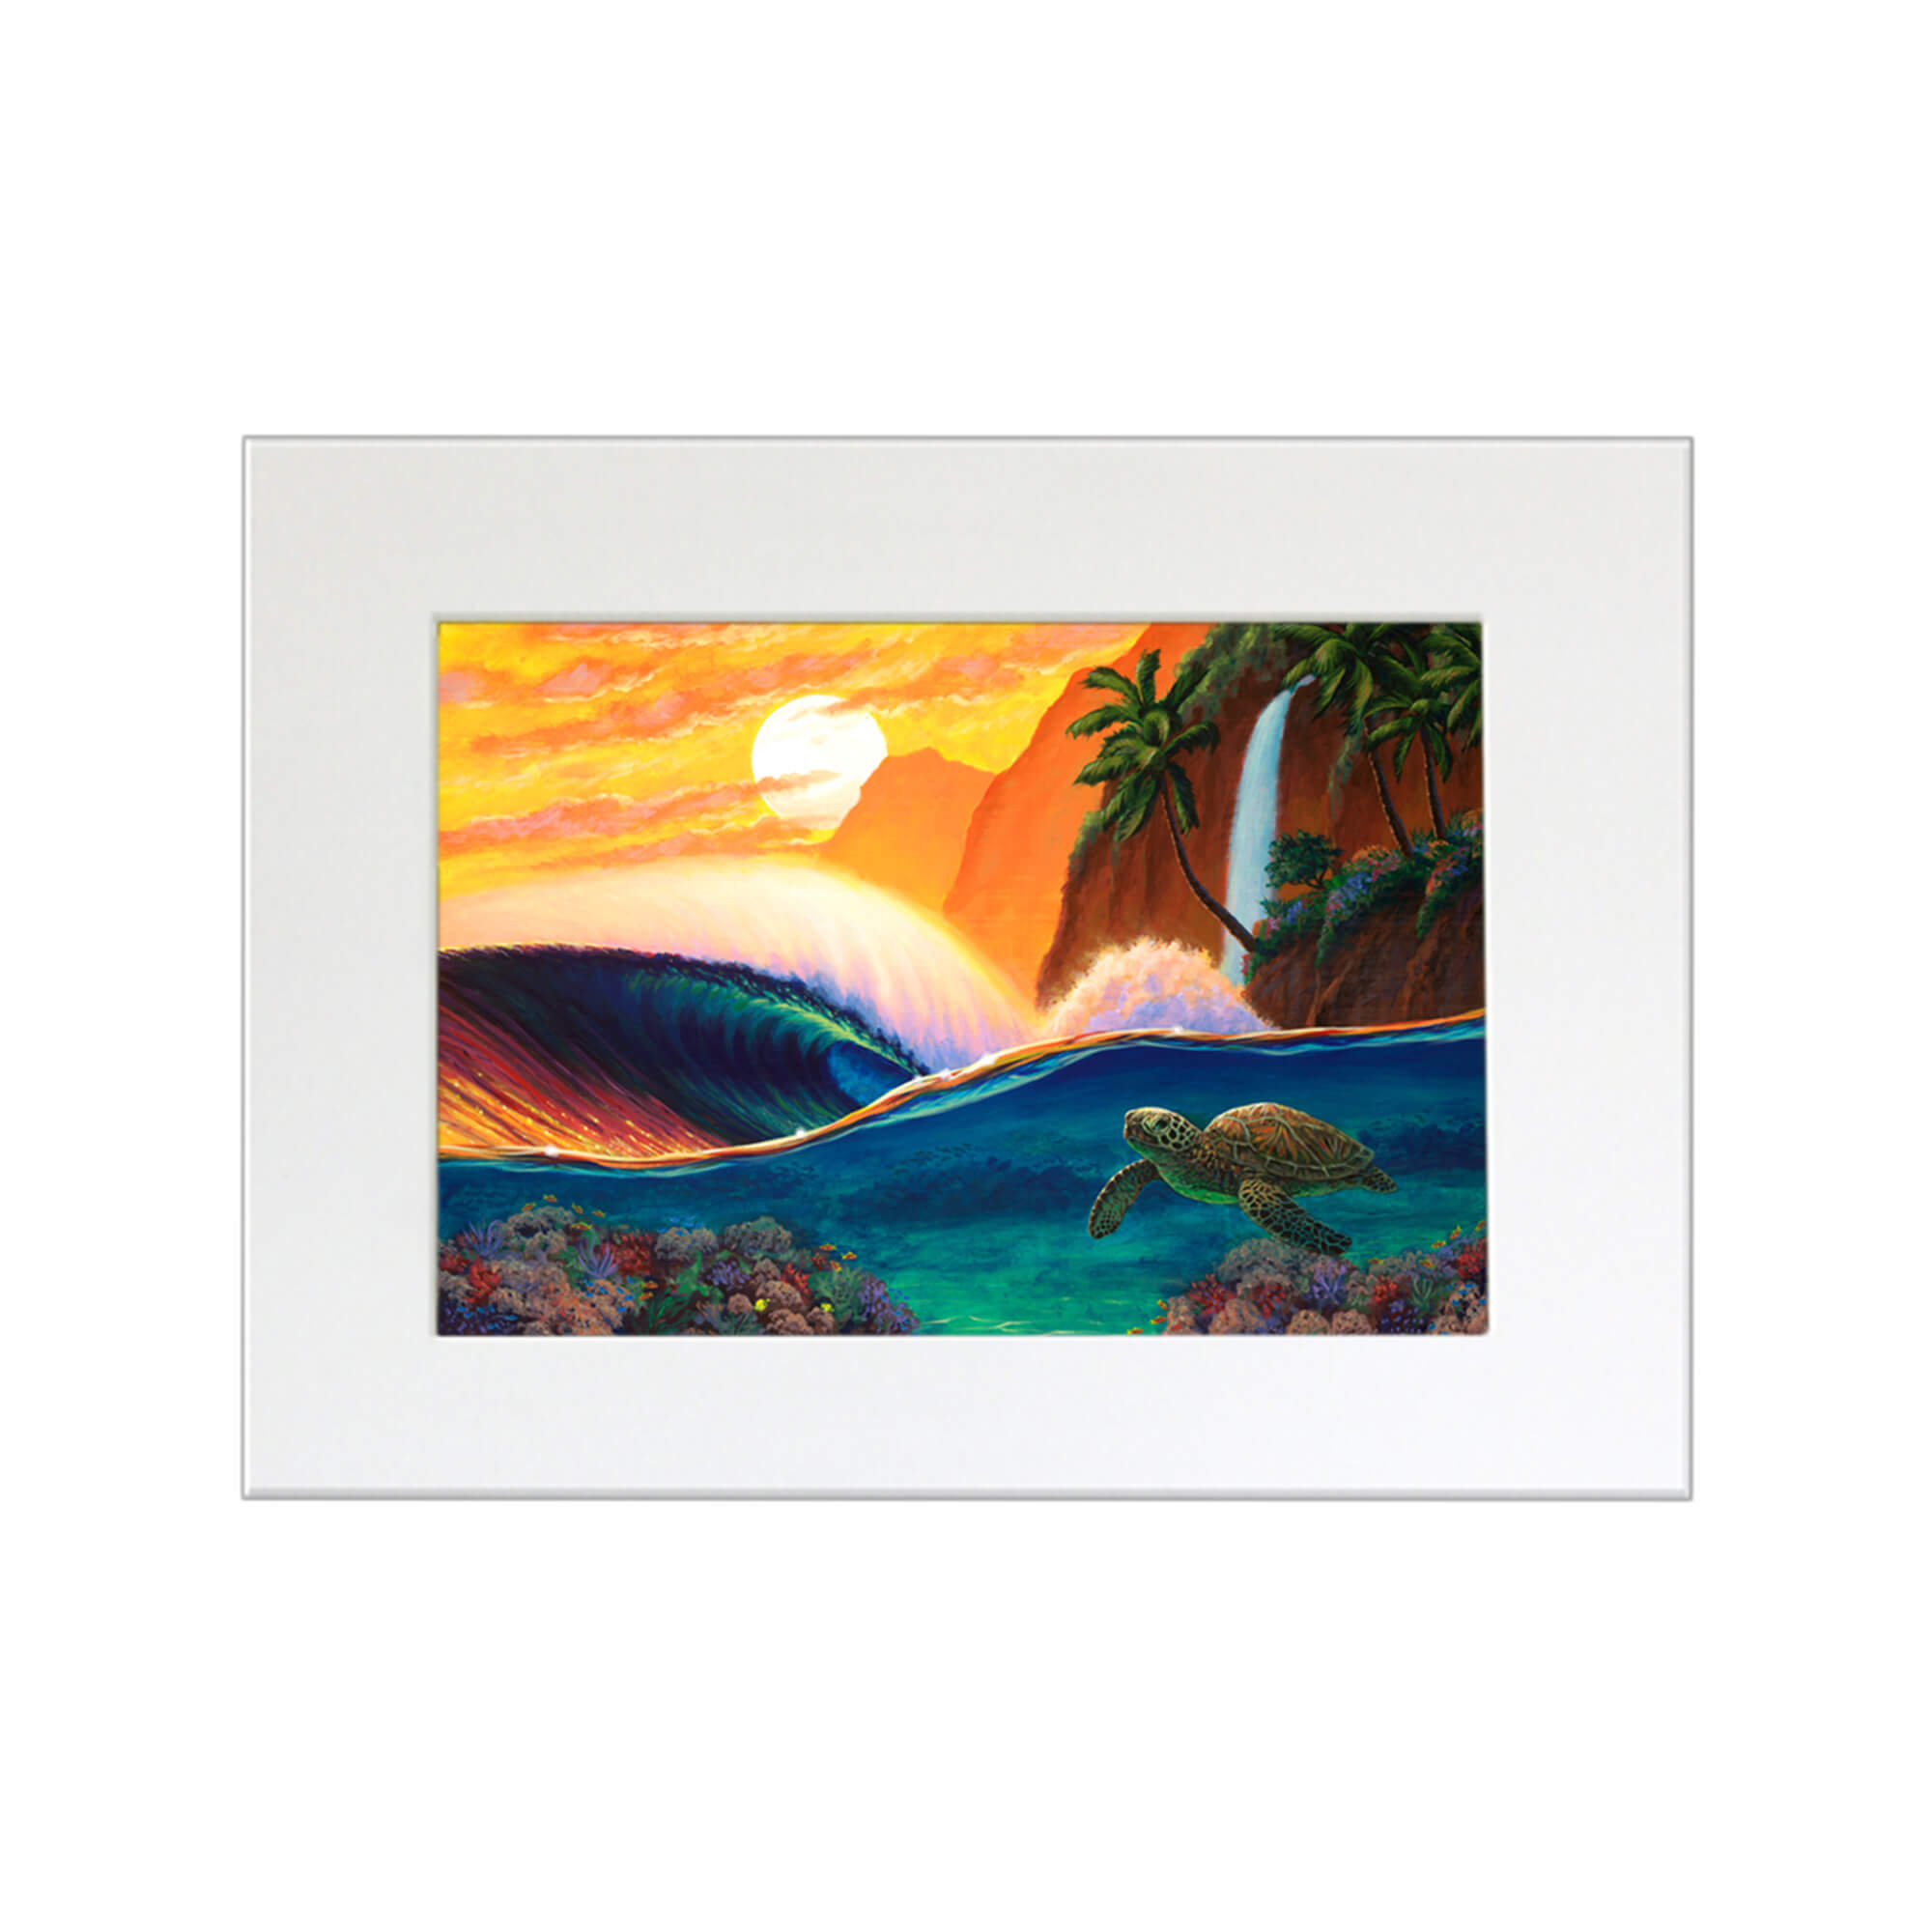 A matted art print featuring a sea turtle swimming and a vibrant sunset, crashing waves, and a mountain waterfall background by Hawaii artist Patrick Parker